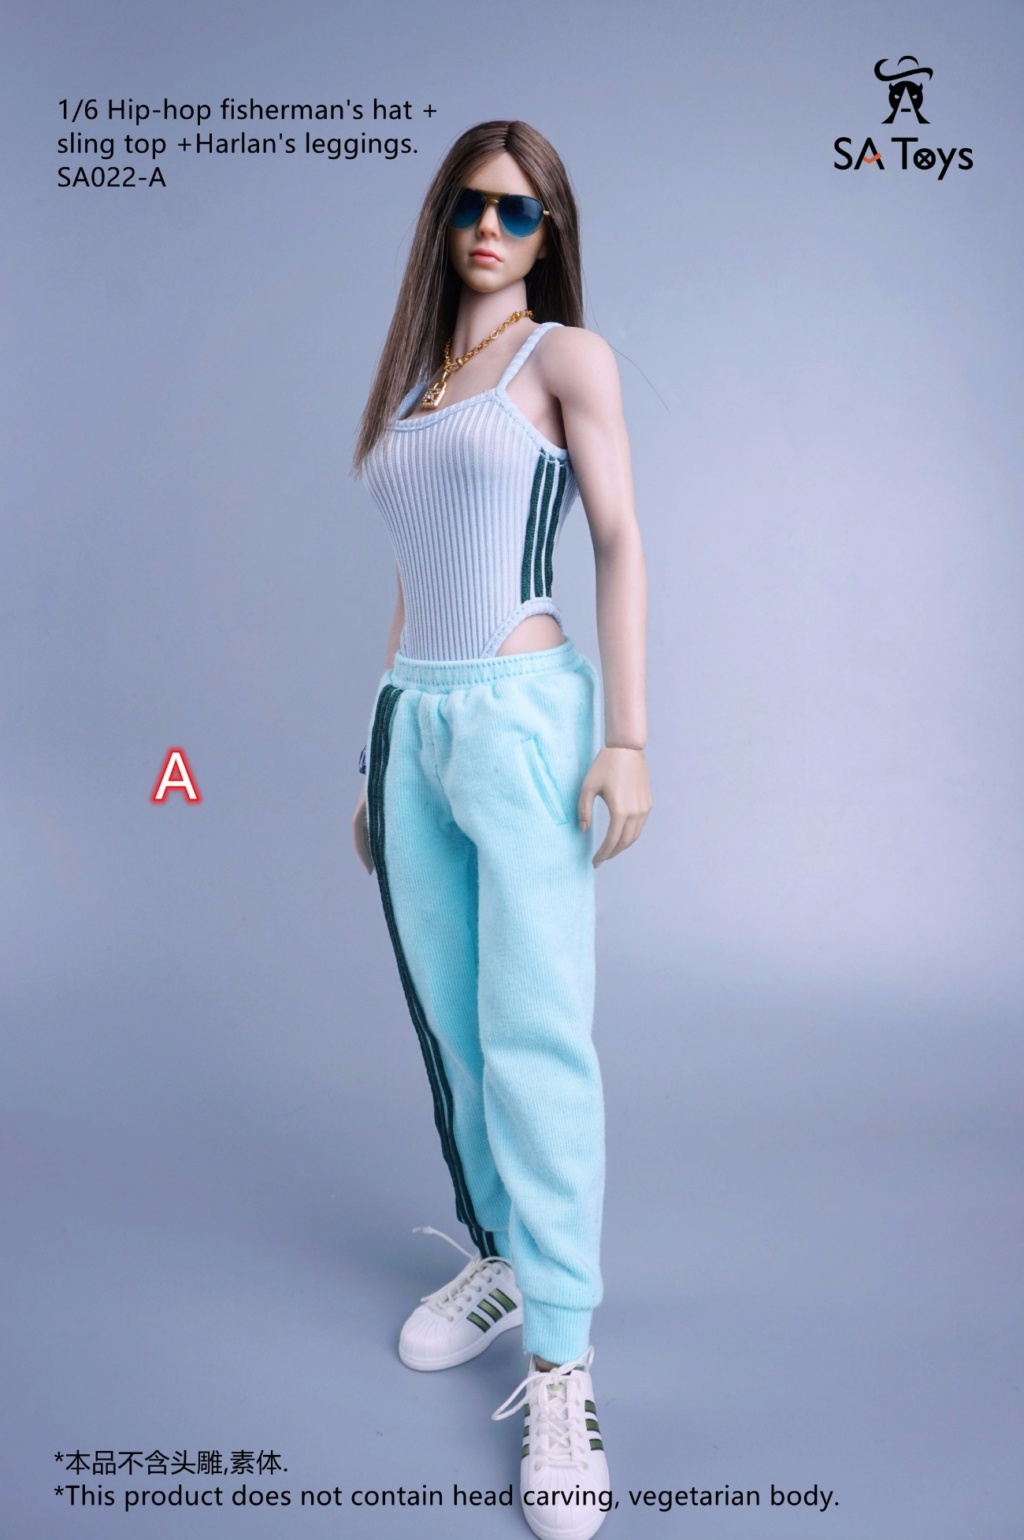 hiphop - NEW PRODUCT: SA Toys: 1/6 hip skirt / floral elastic skirt / fashionable sports style hooded sweater cover, hip-hop fisherman hat halter and footwear casual pants [variety optional] 21402710